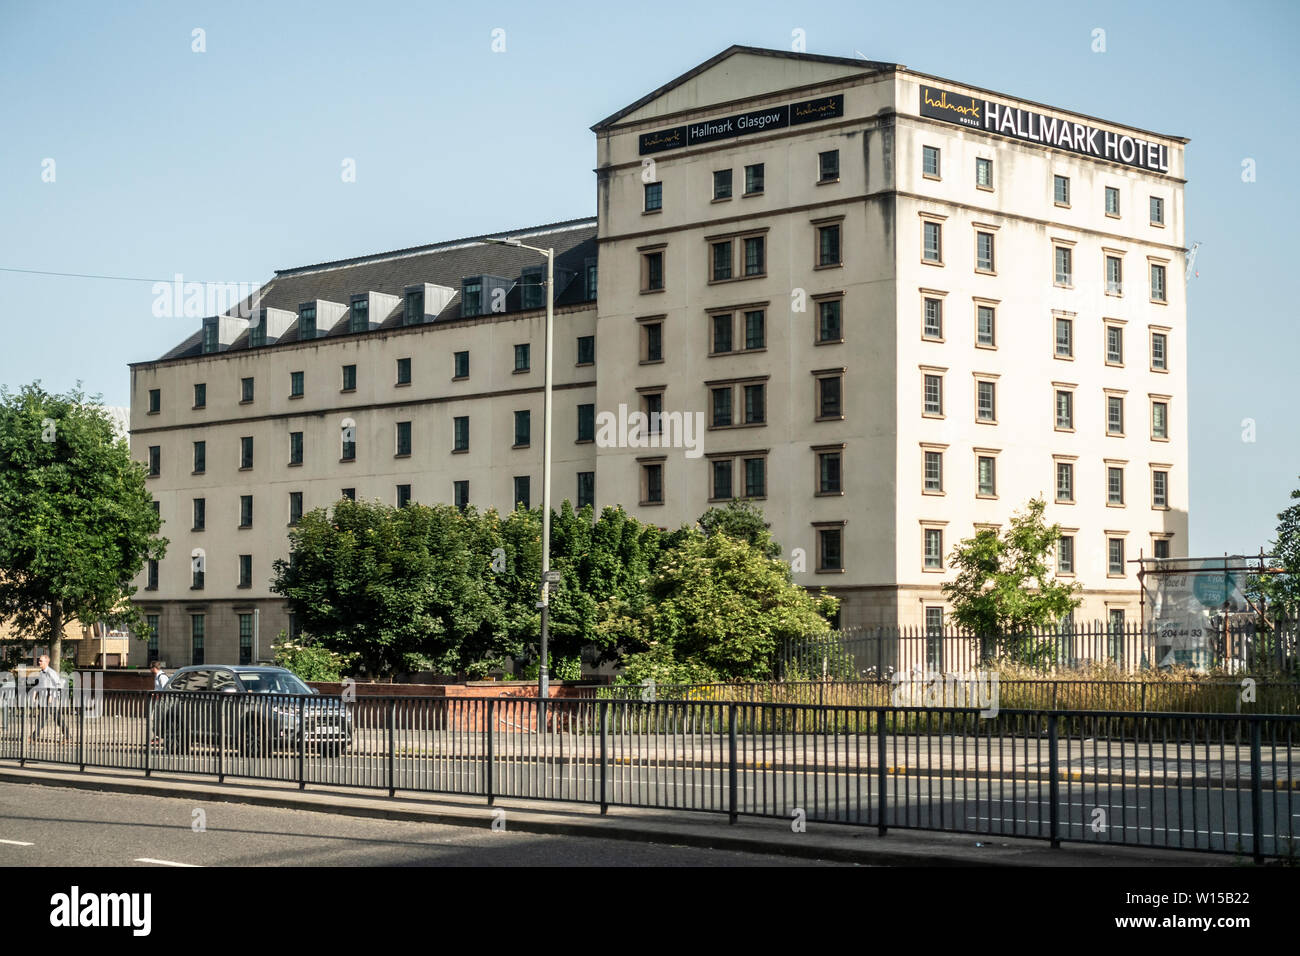 Exterior of the Hallmark Hotel, a Four Star Hotel in the Anderston area of central Glasgow, Scotland Stock Photo